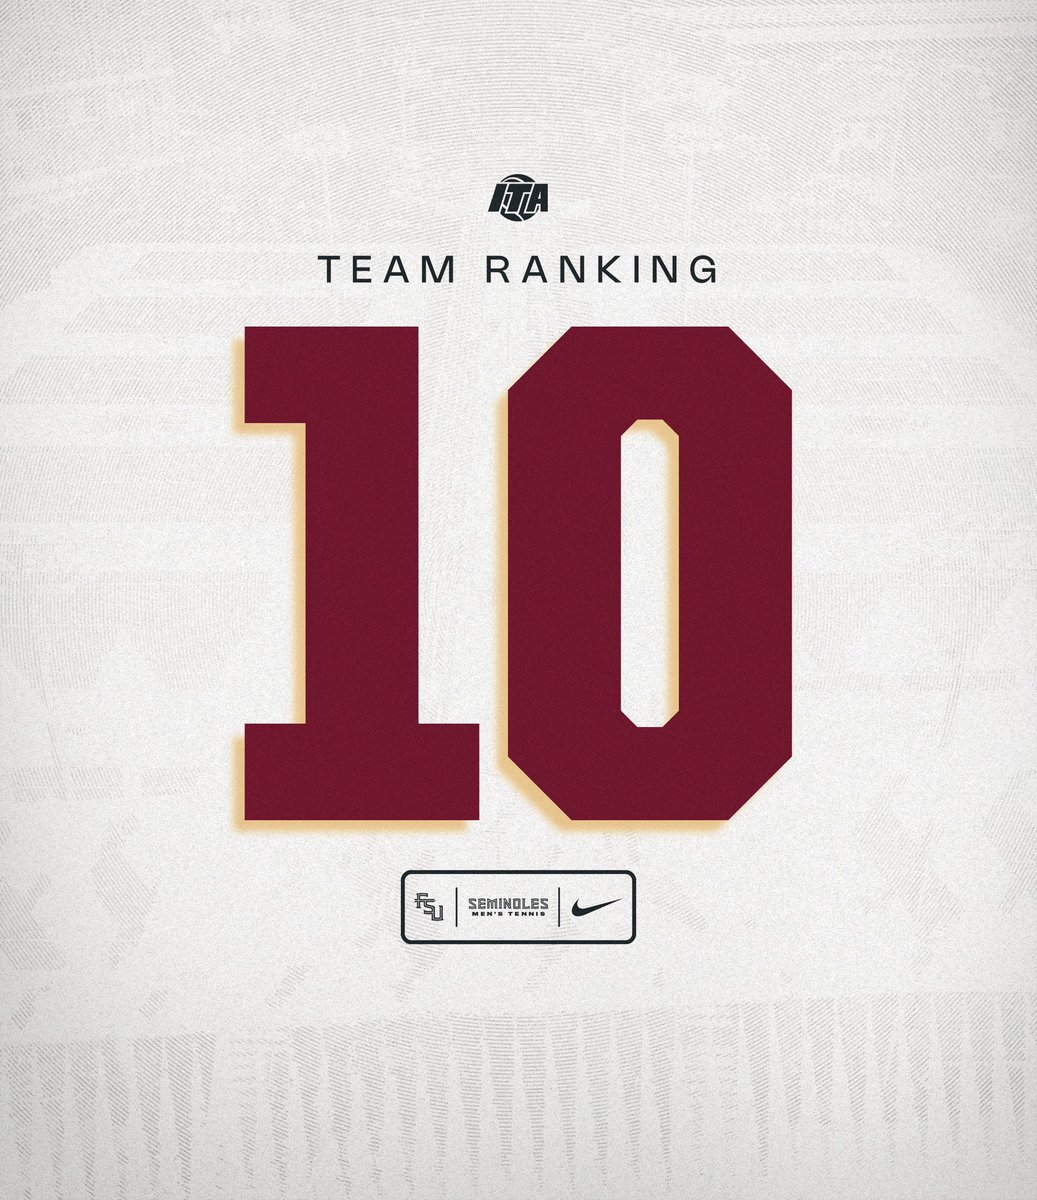 𝐓𝐡𝐞 𝐅𝐢𝐧𝐚𝐥 𝐓𝐞𝐚𝐦 𝐑𝐚𝐧𝐤𝐢𝐧𝐠 💪😎 For the first time ever, Florida State finishes the season as one of the Top 10 programs in the nation 🔥🍢 #OneTribe | #GoNoles